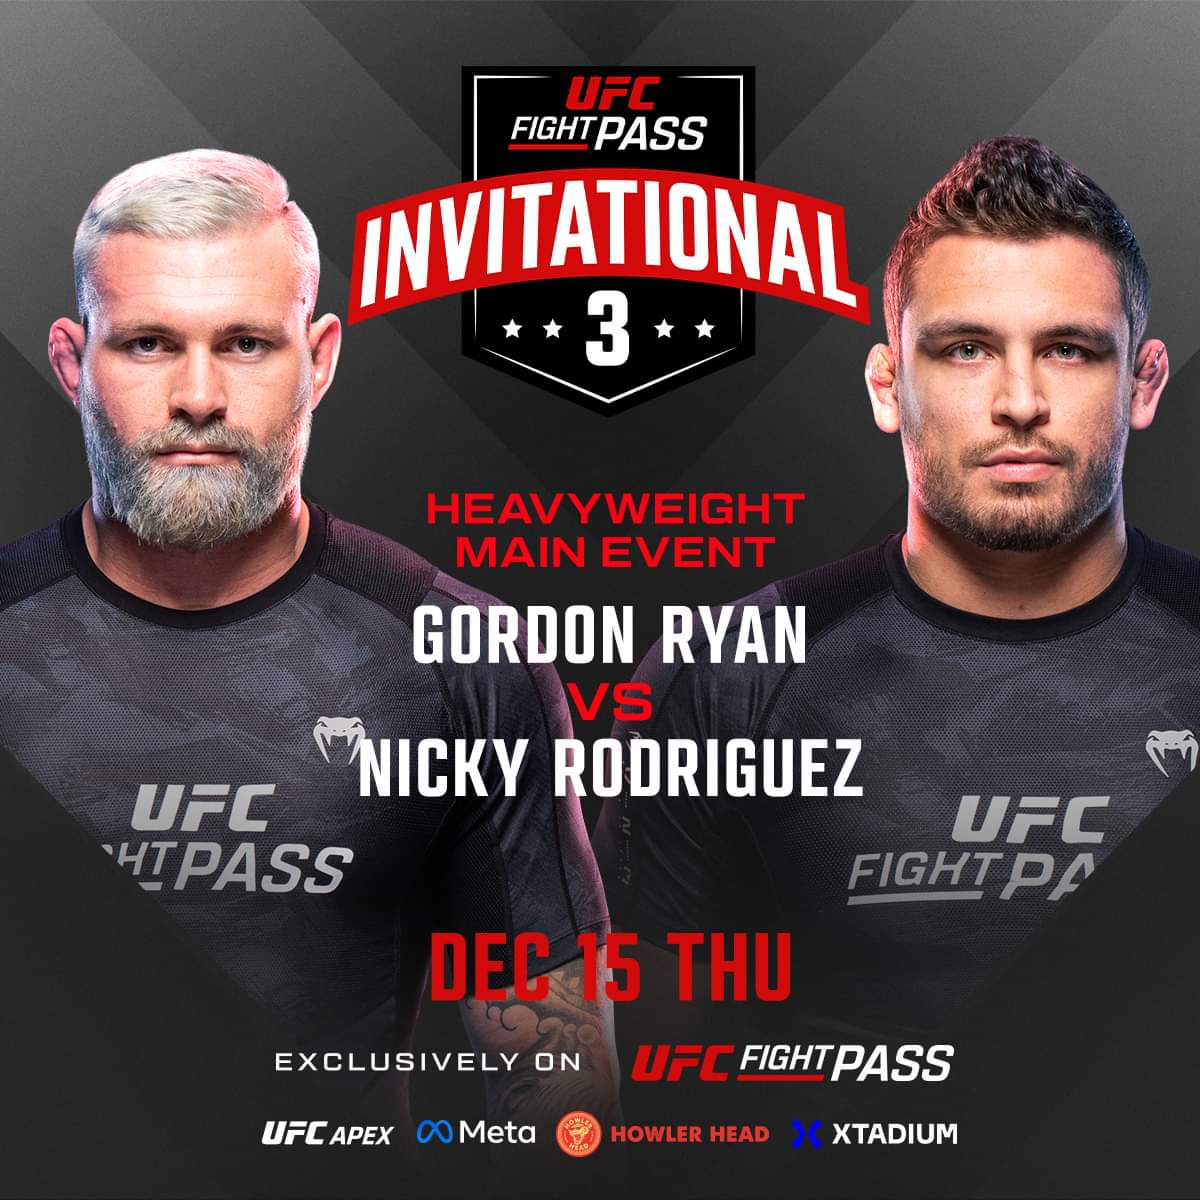 UFC Fight Pass Invitational 3 Live Results